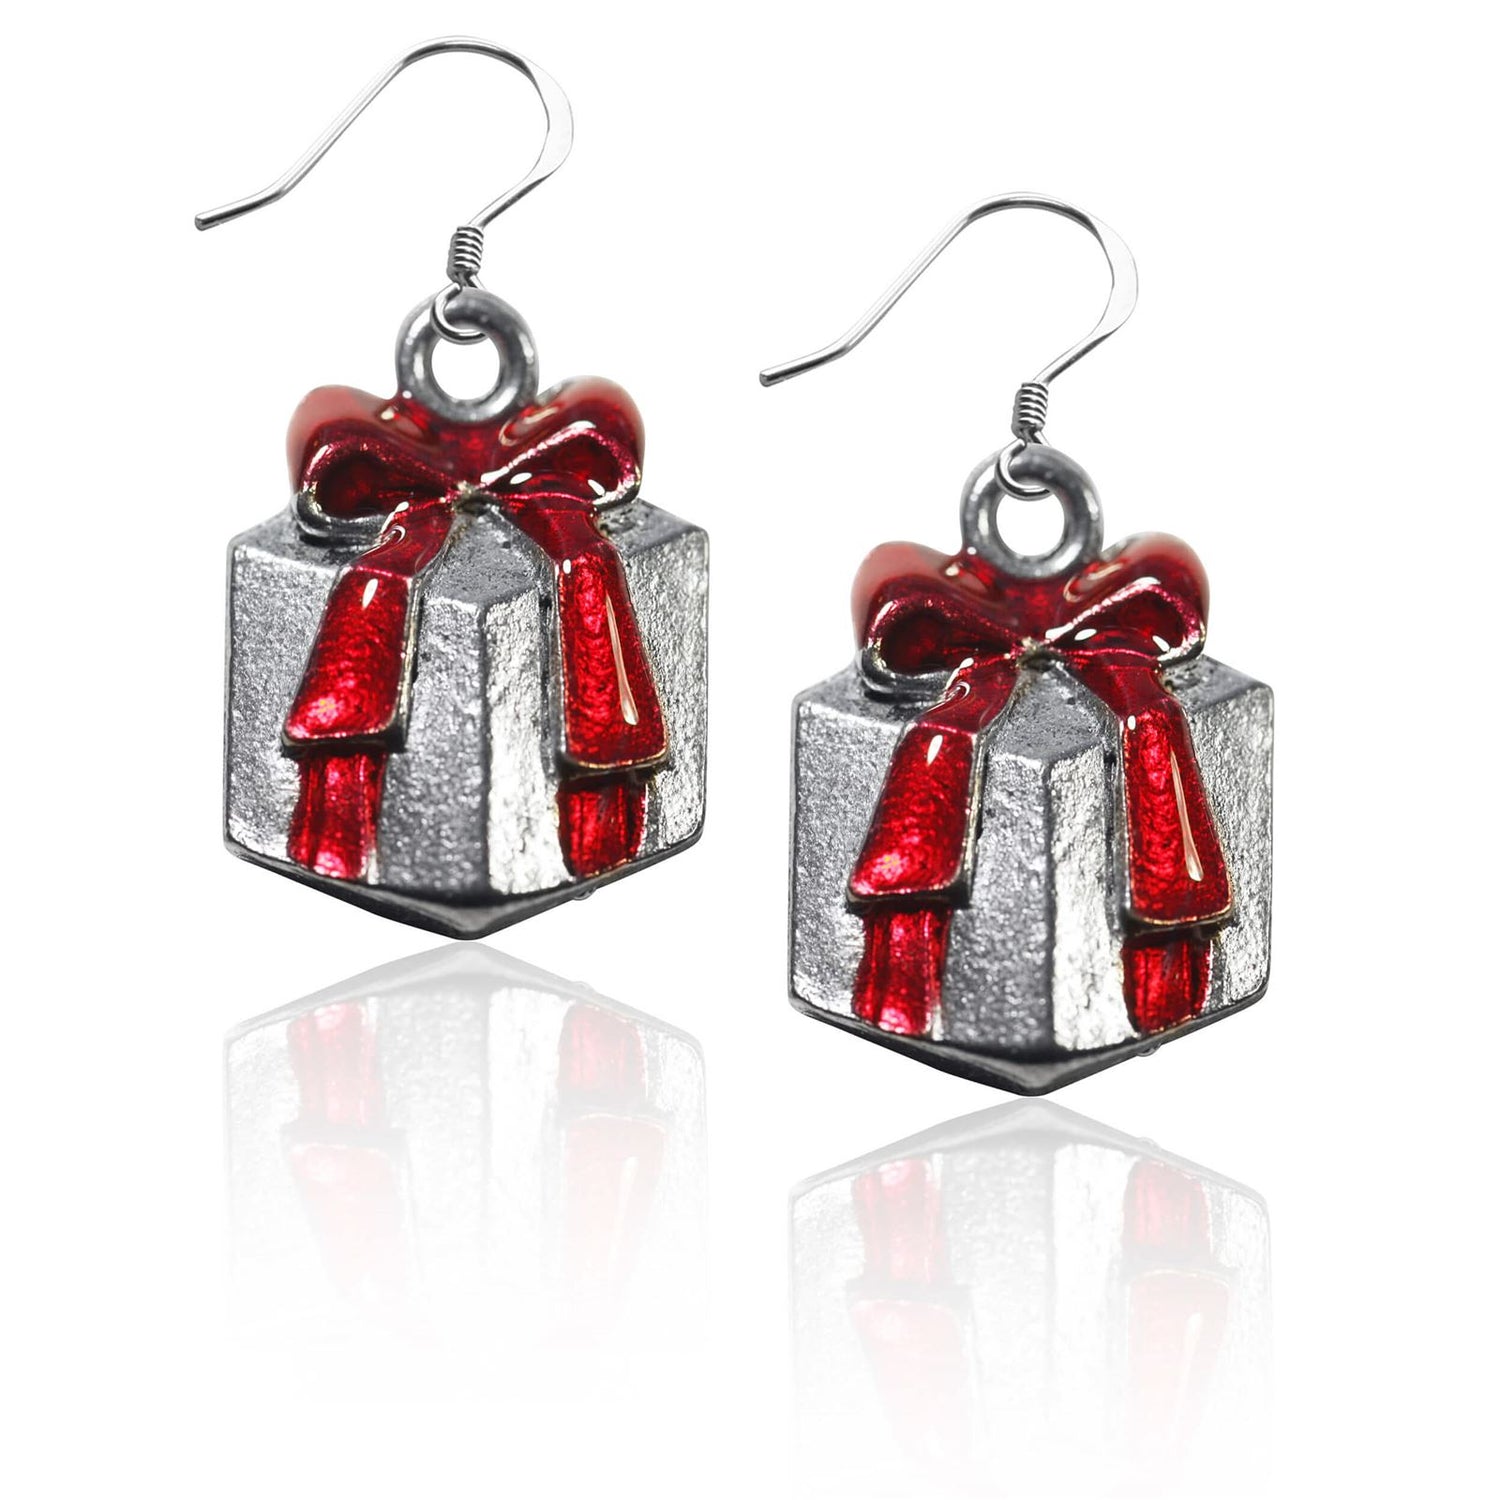 Whimsical Gifts | Christmas Present Charm Earrings in Silver Finish | Holiday & Seasonal Themed | Christmas | Jewelry